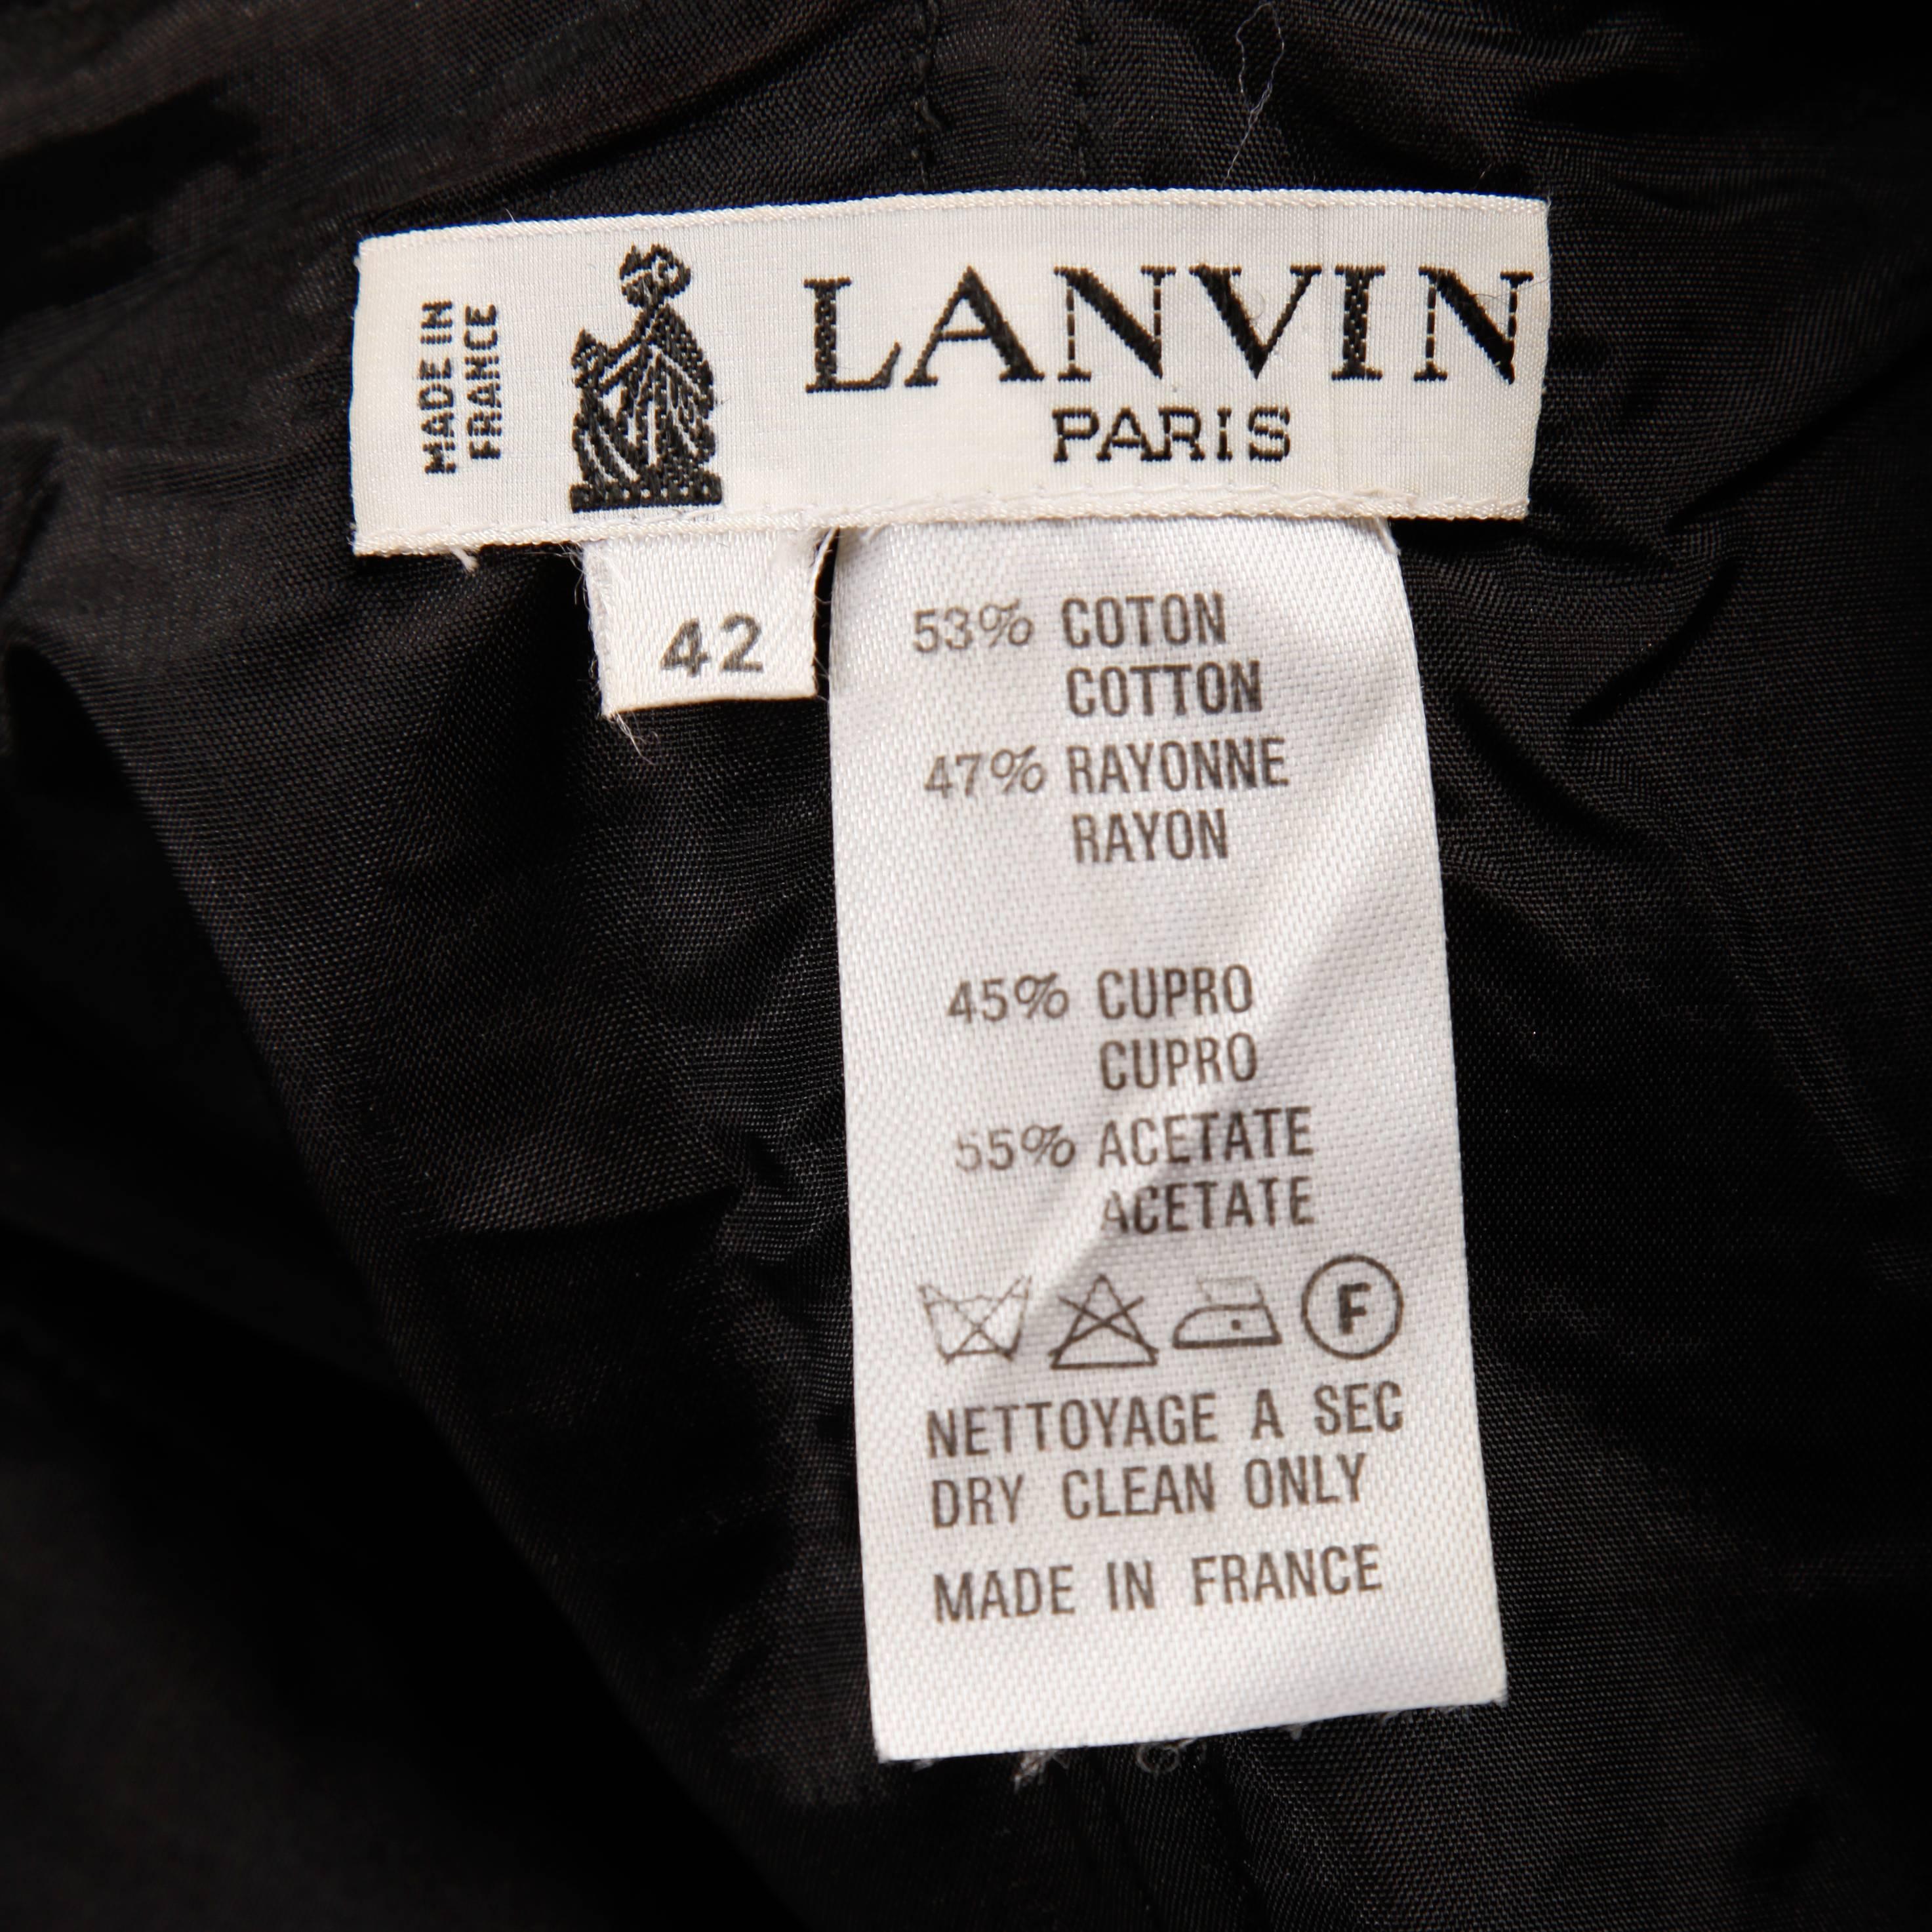 Vintage 1980s strapless moire dress by Lanvin with black velvet bows detail. Fully lined with side metal zip and hook closure. Hidden side pockets. 53% cotton, 47% rayon. The marked size is 42, but the dress fits like a modern size small. The bust